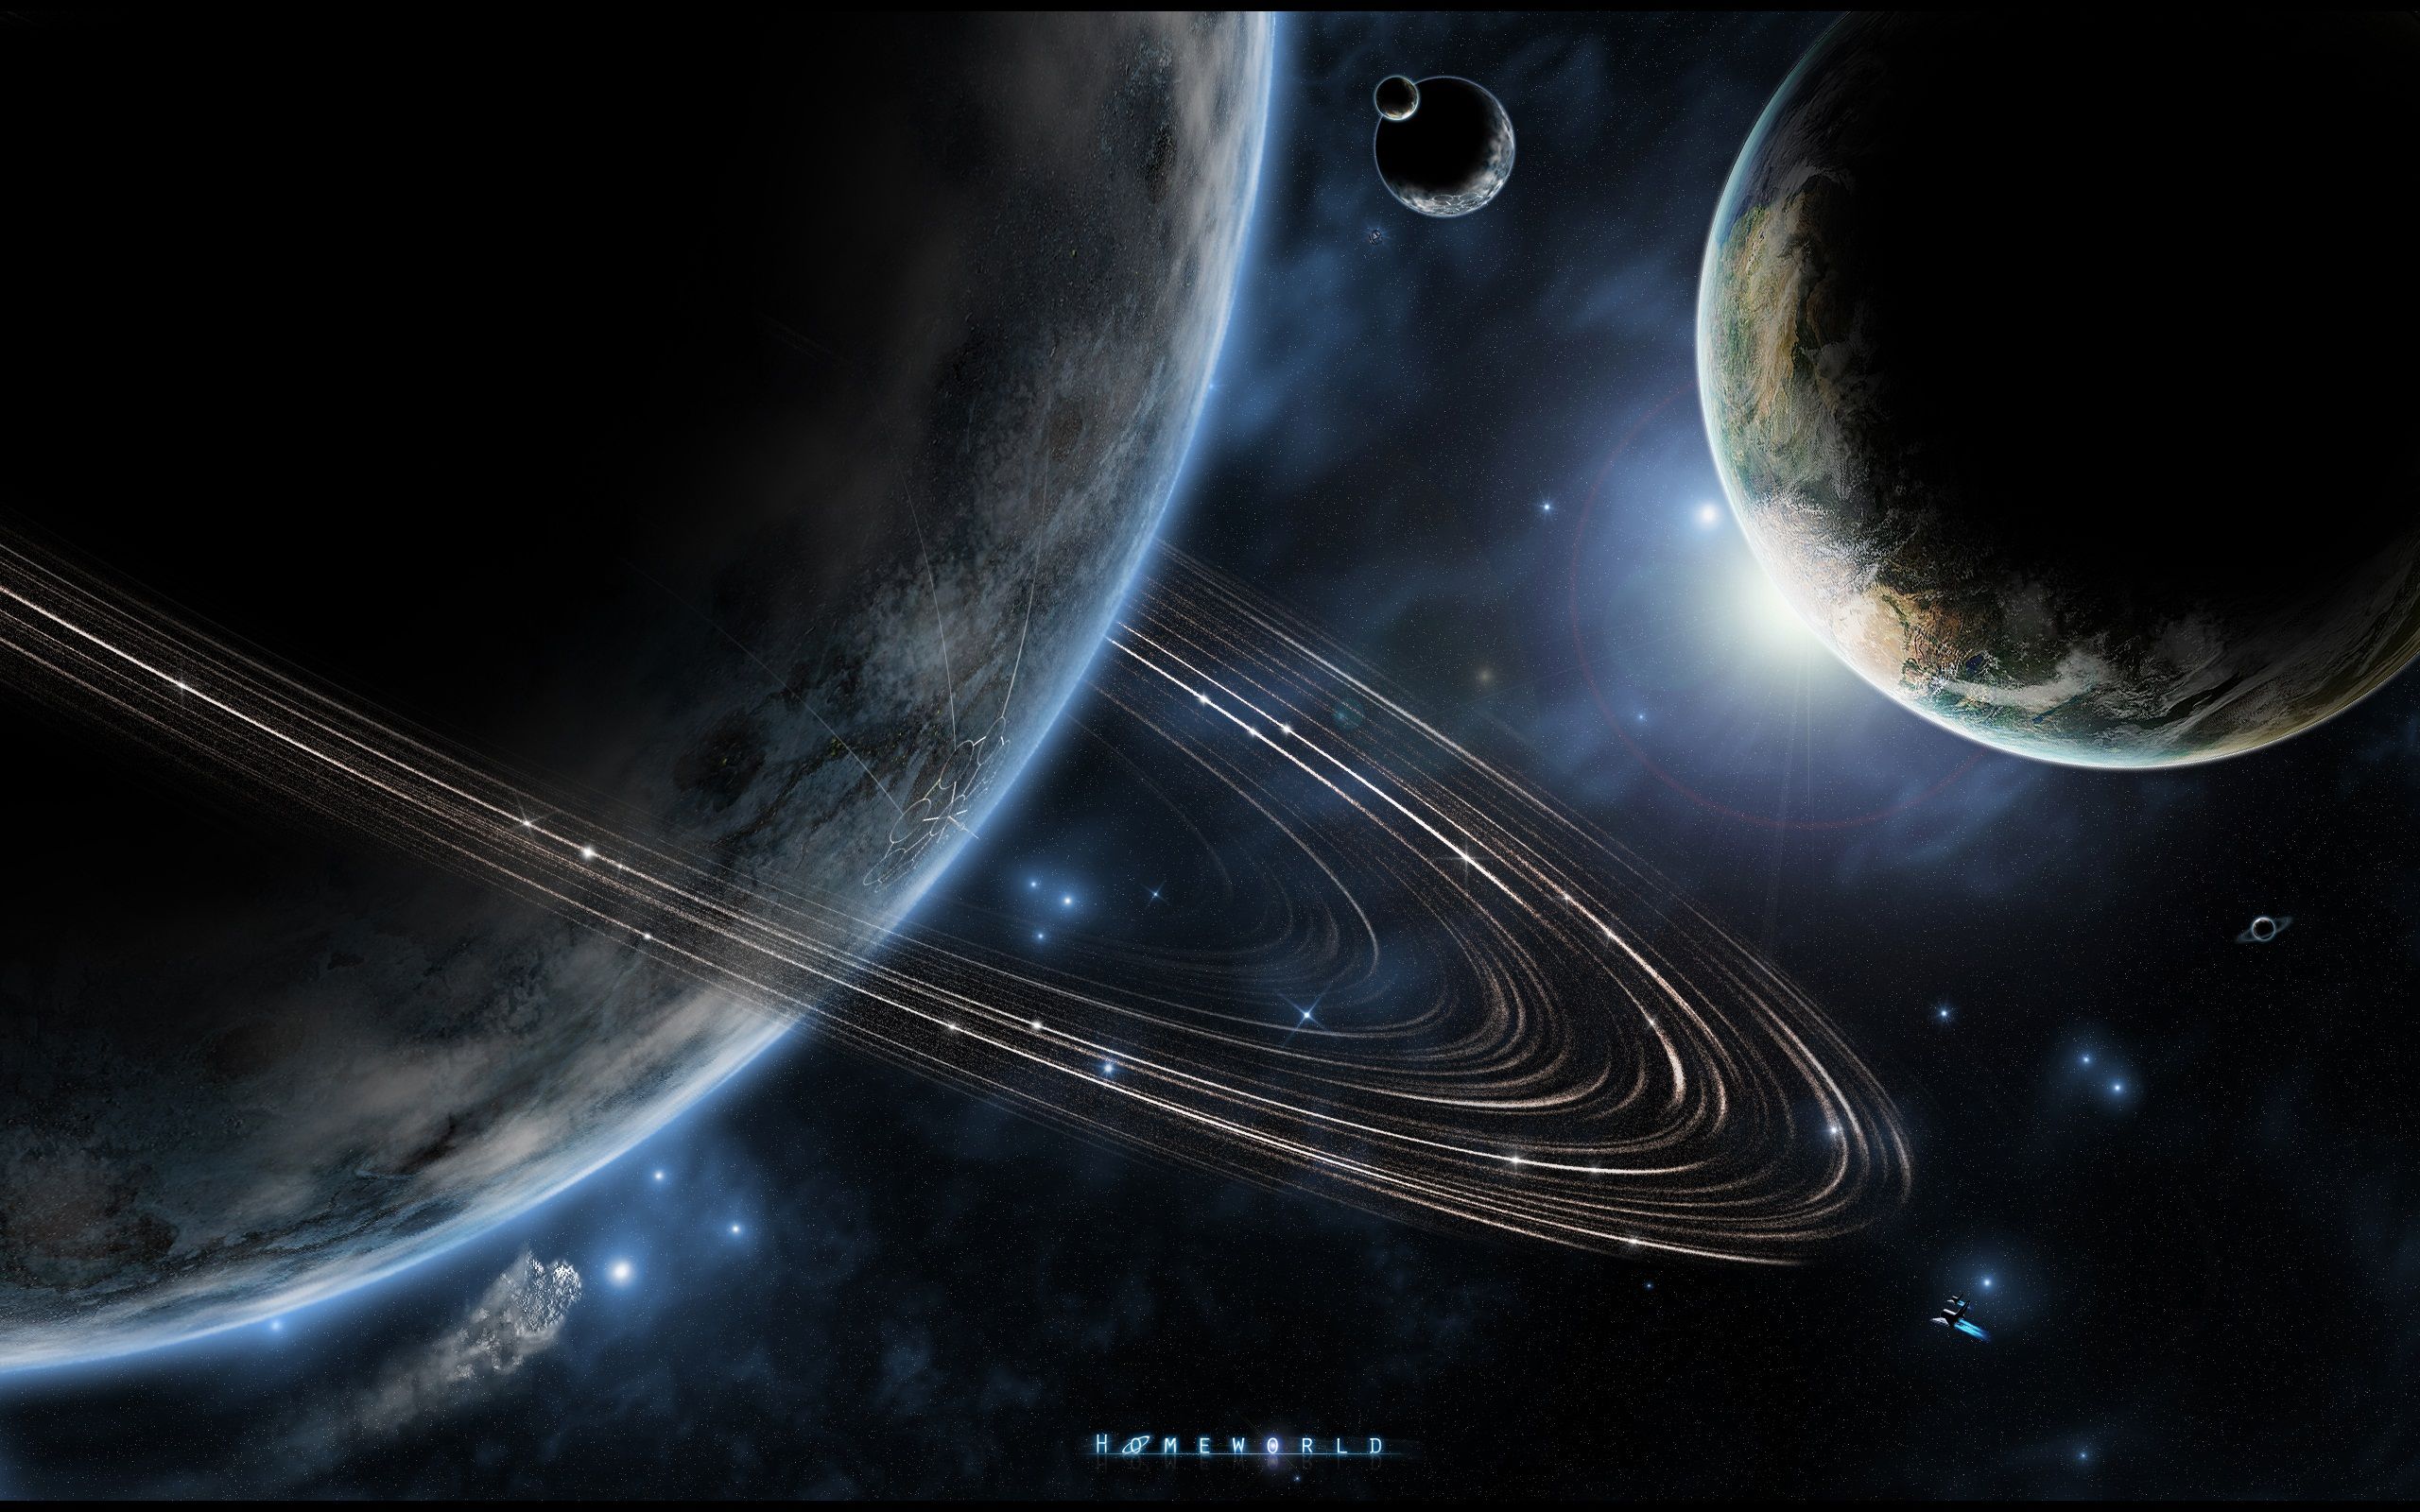 Space Universe Wallpapers HD - Pics about space